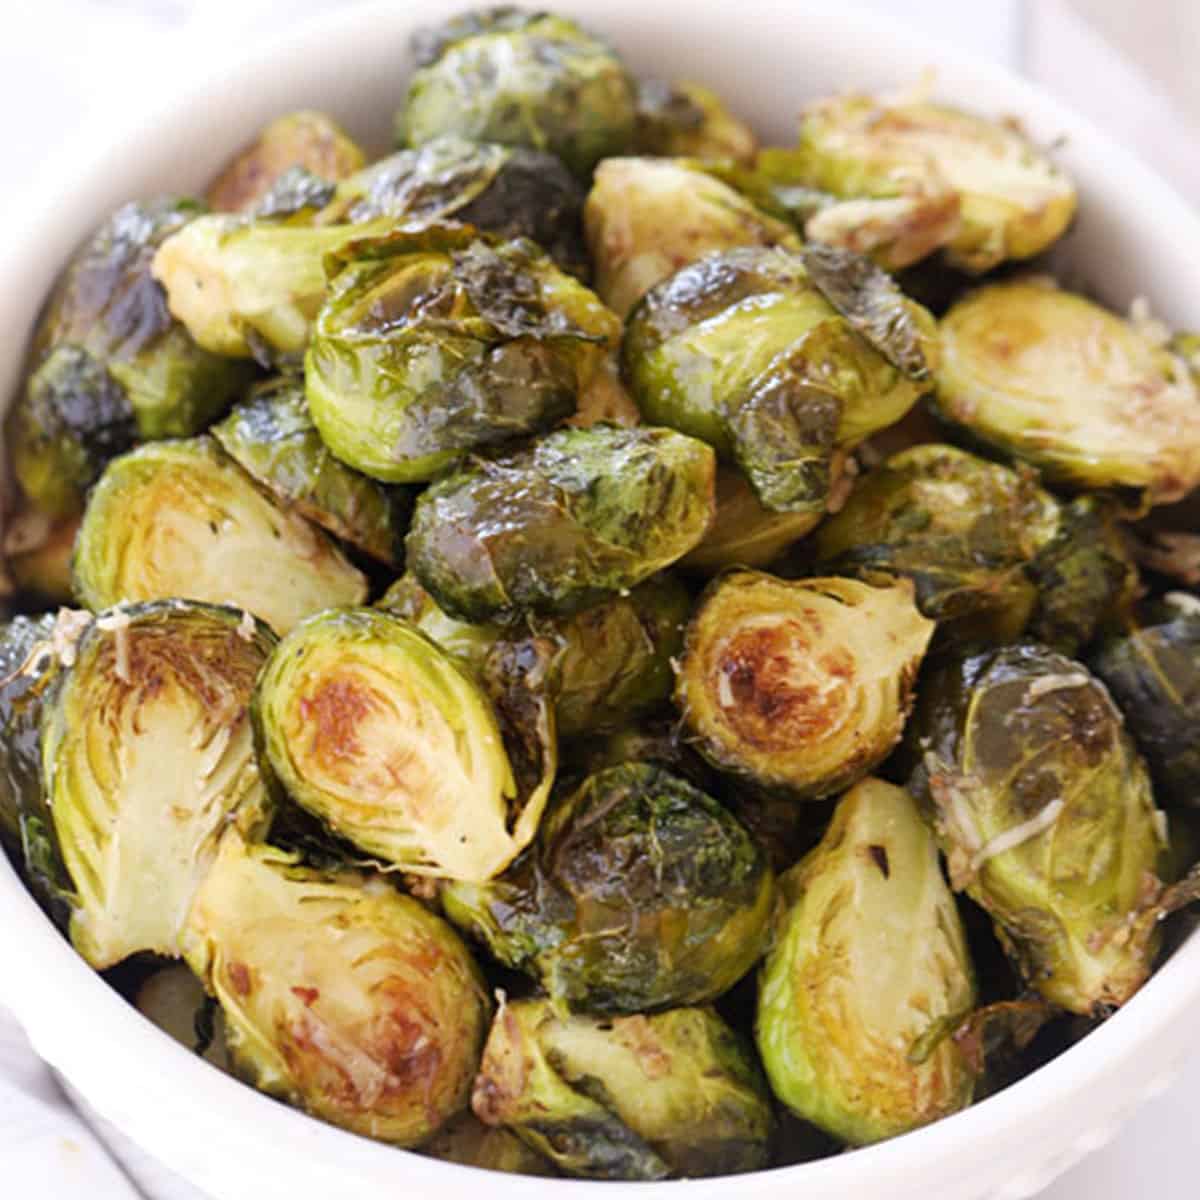 Roasted Brussels sprouts in a serving dish.